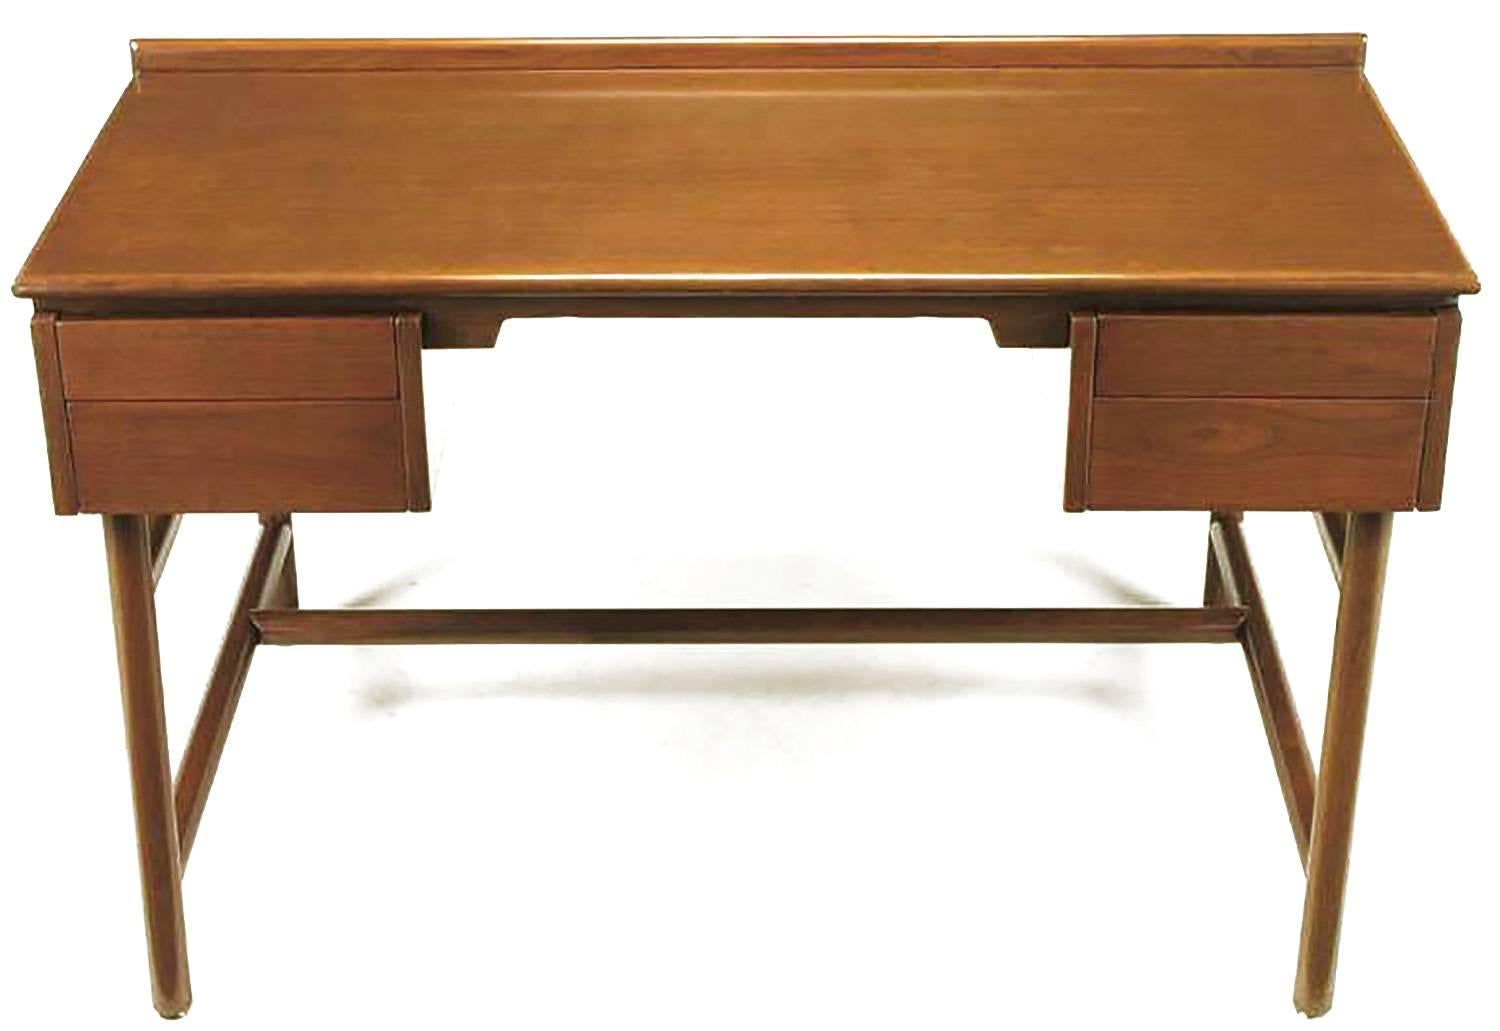 Walnut desk by William Pahlmann with four drawers and front shelf. Unusual base of large intersecting dowels. Restored to outstanding original condition. From Pahlmann's 1952 Hastings Square Collection for Grand Rapids bookcase and chair company.